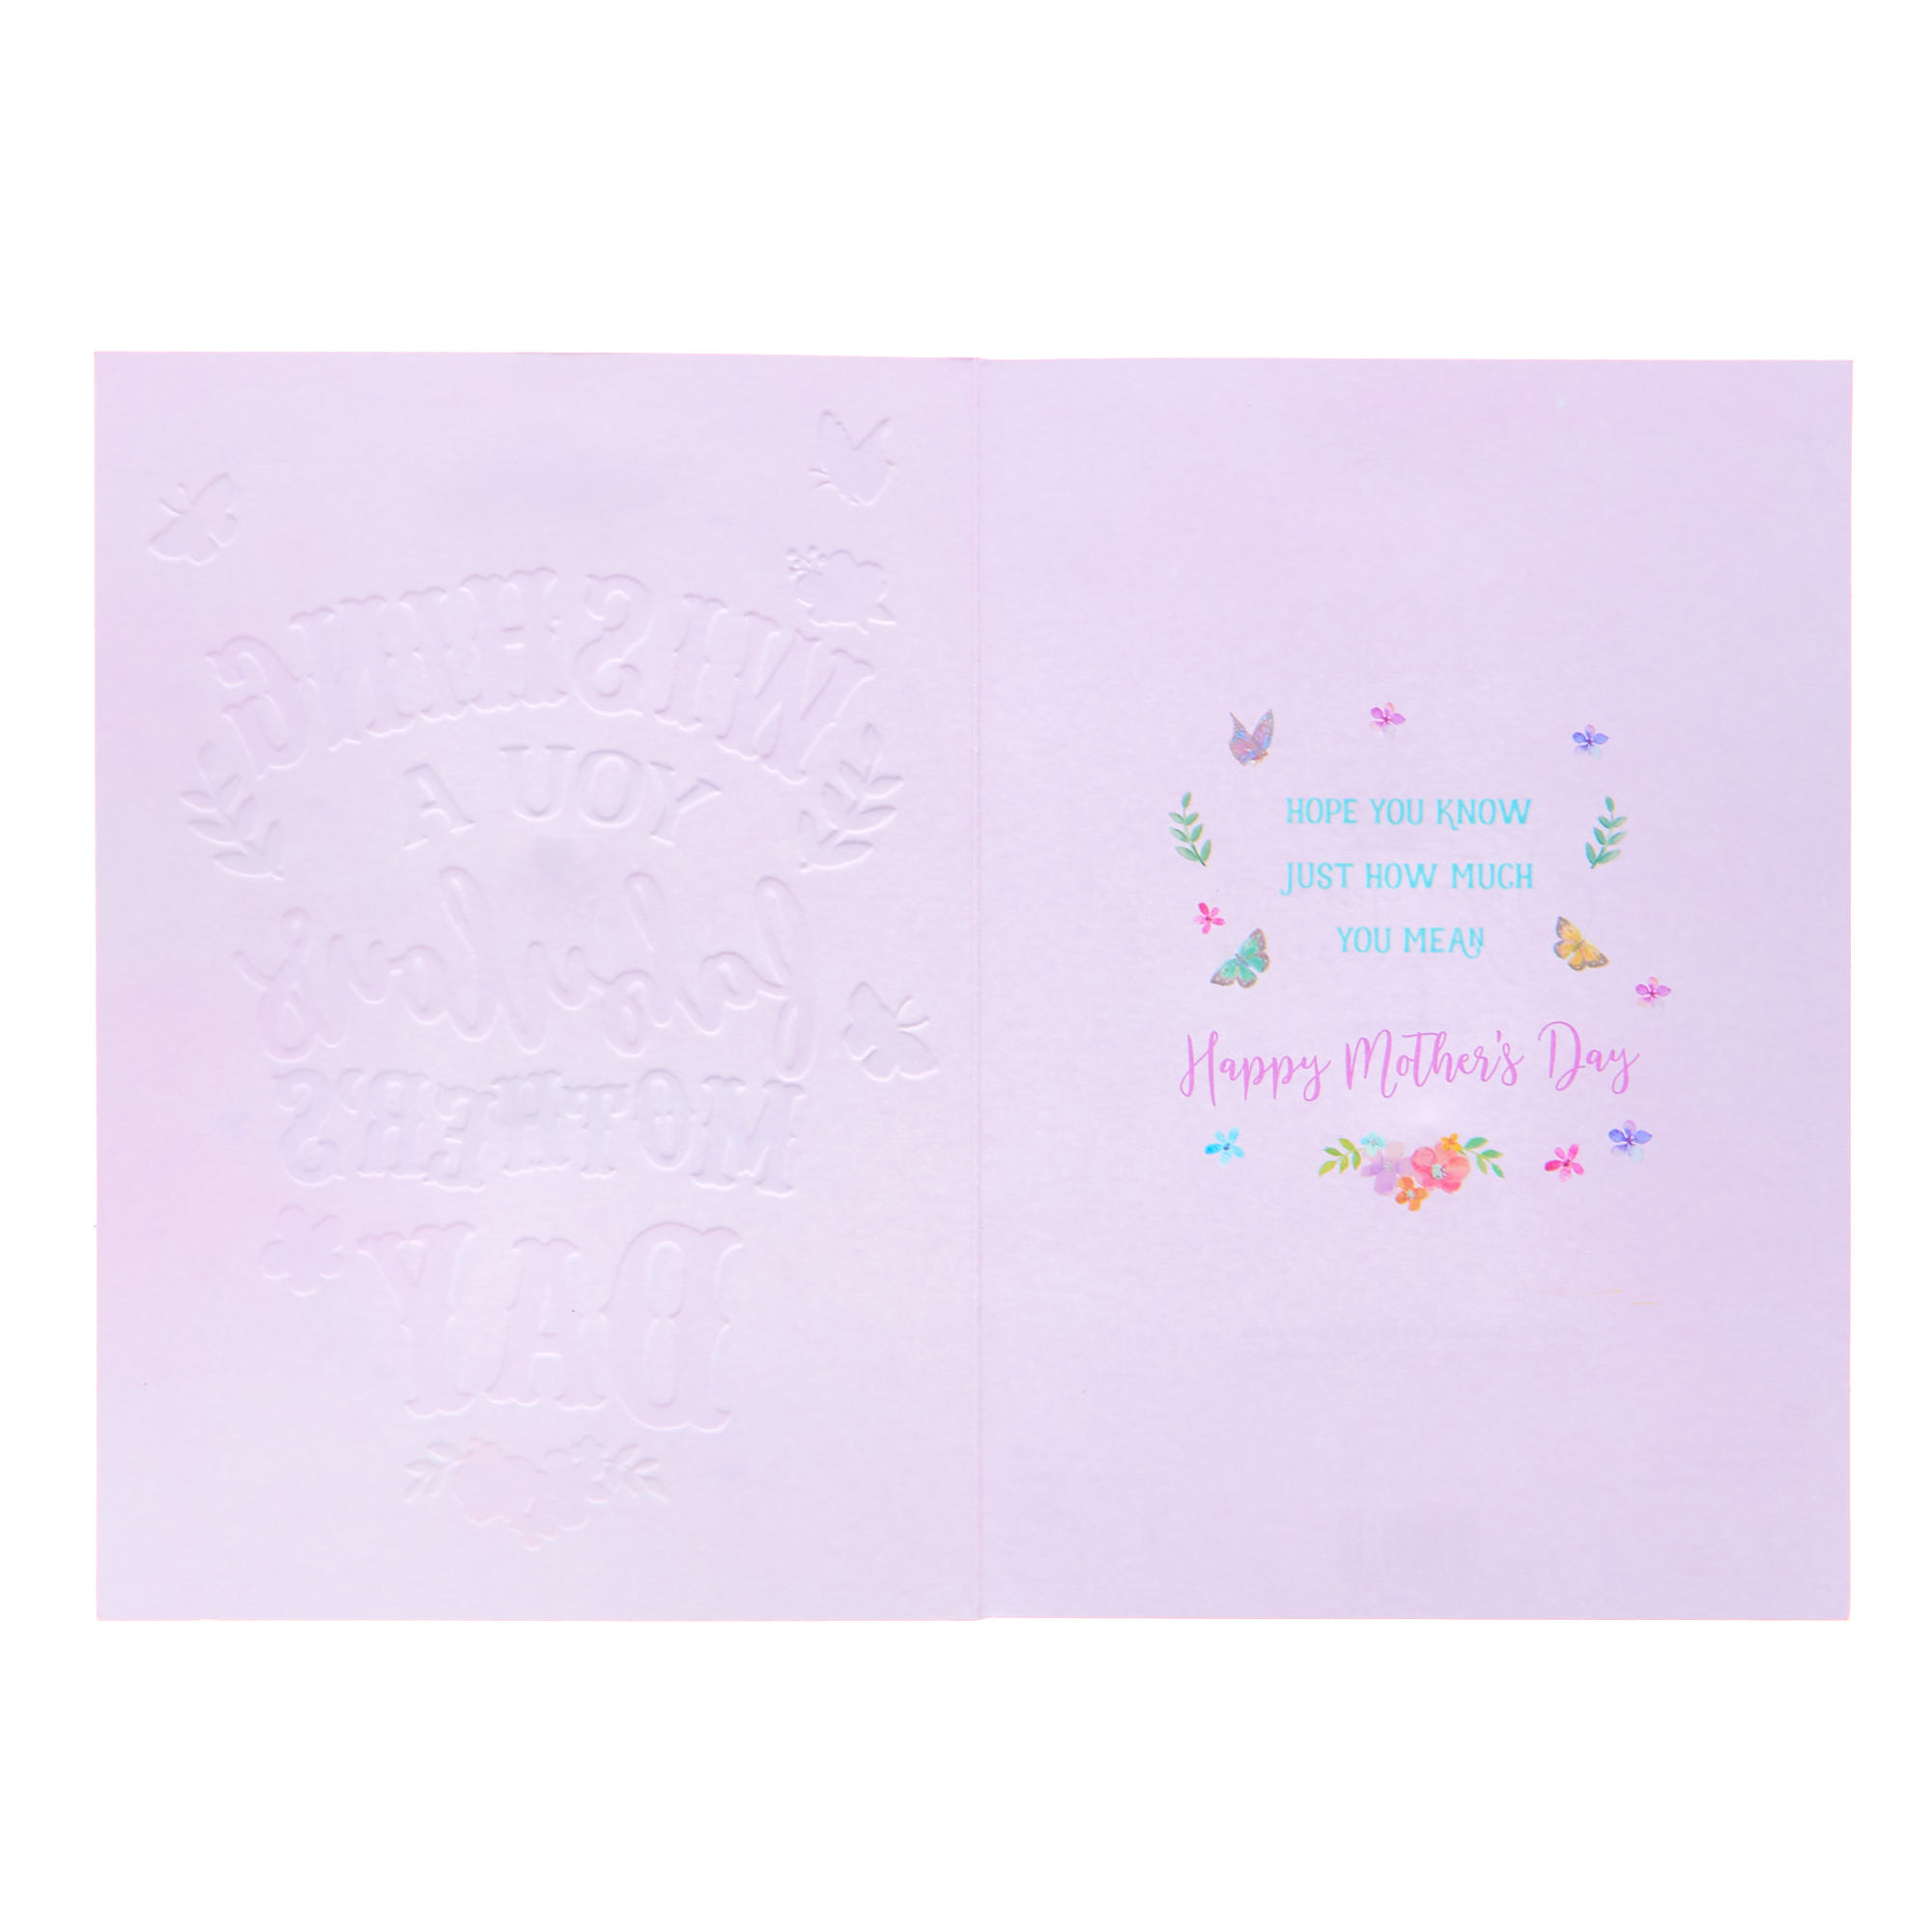 Buy Wishing You A Fabulous Mother's Day Card for GBP 1.29 | Card Factory UK